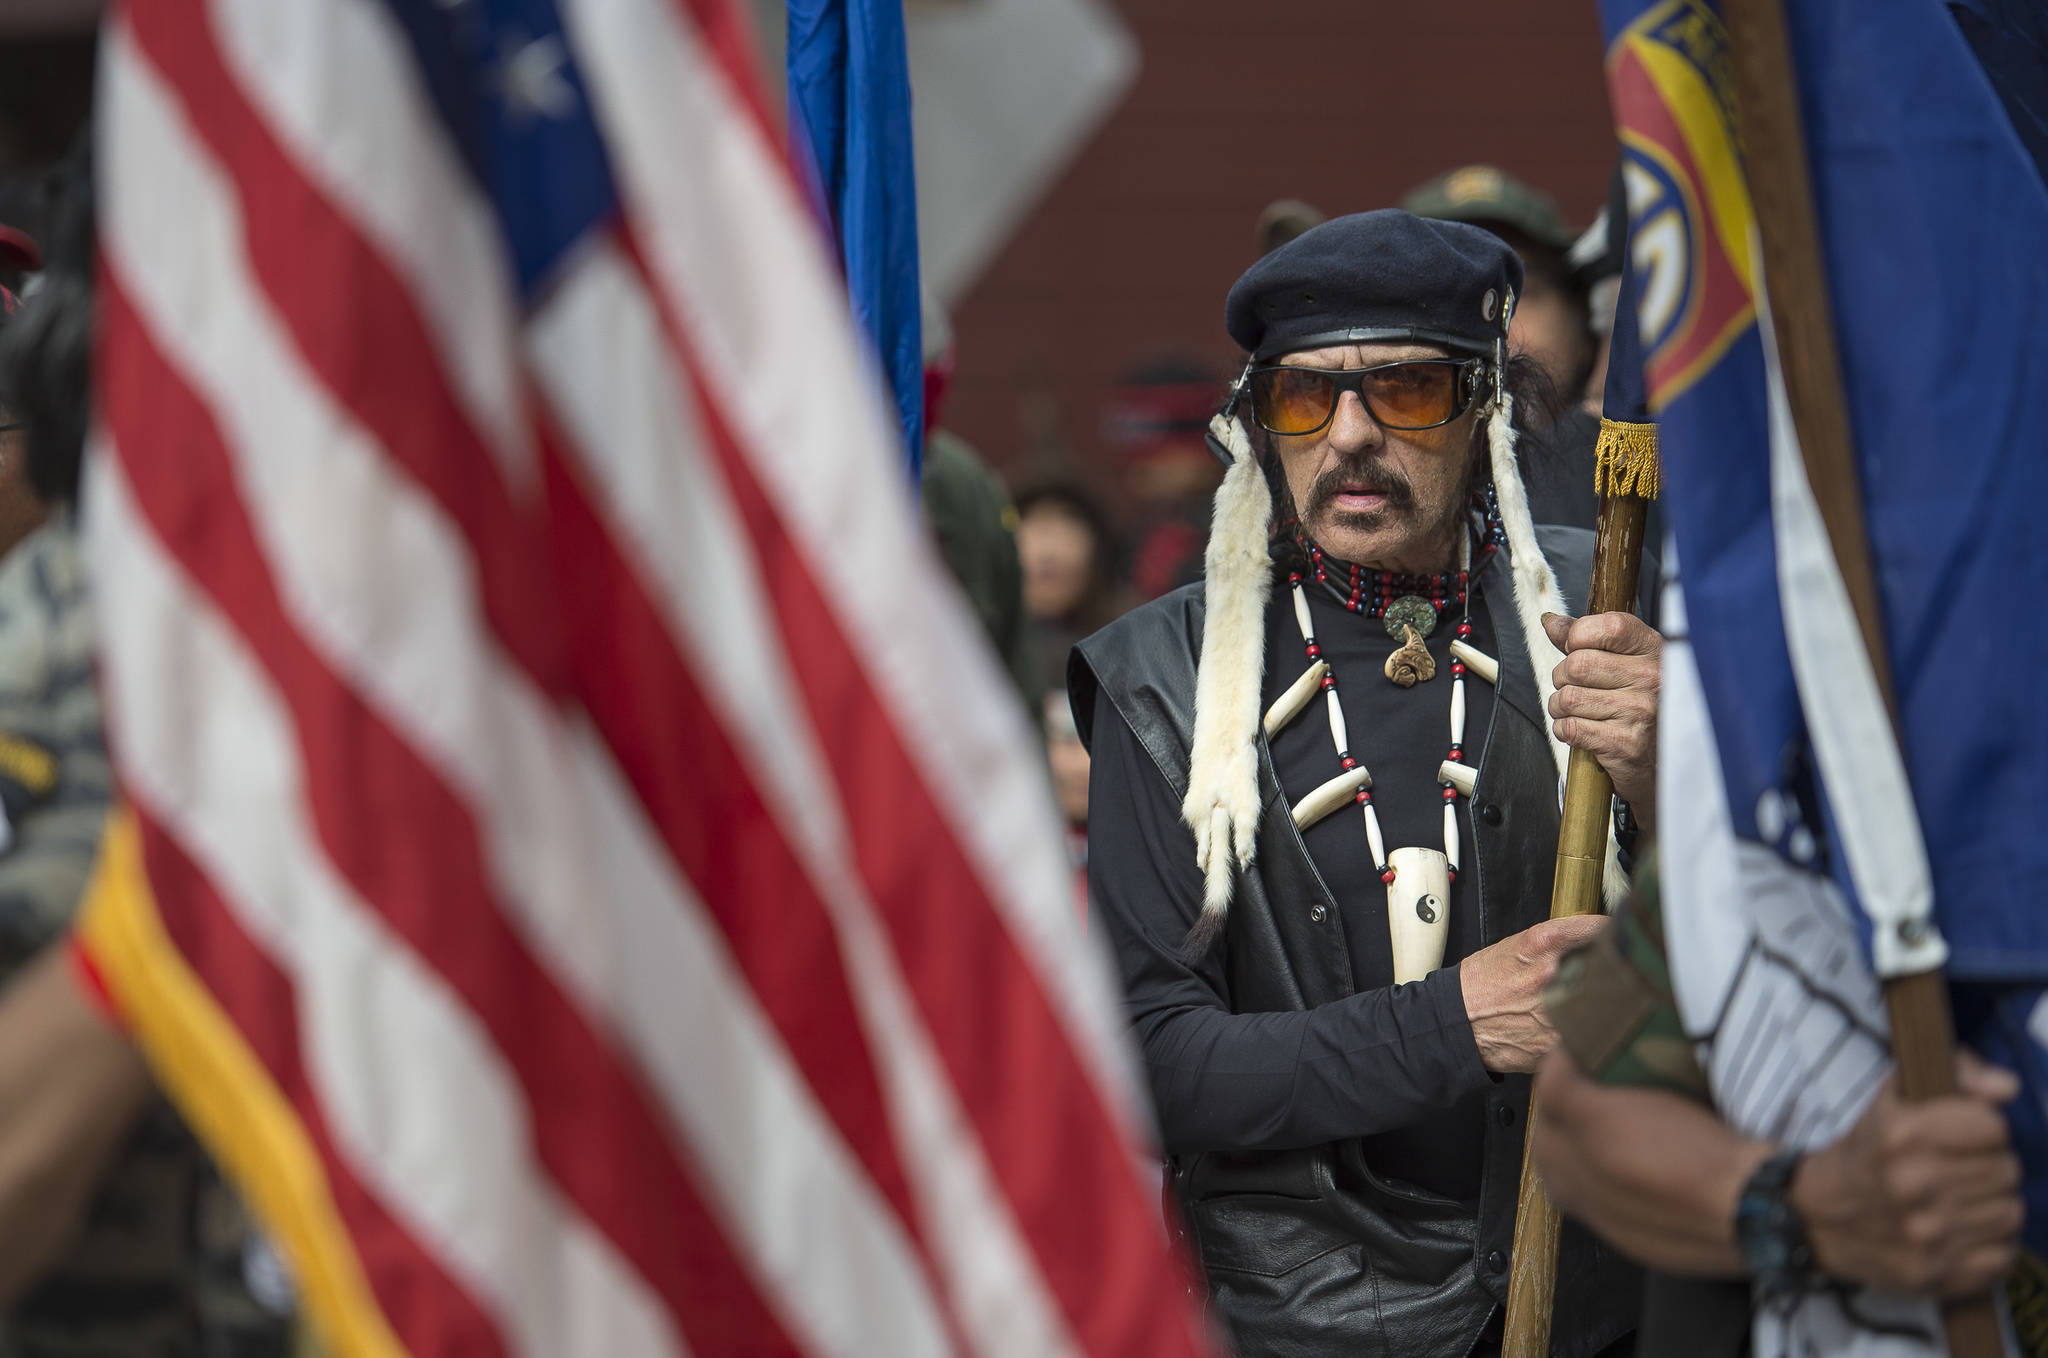 Wayne Smallwood lines up with the Southeast Alaska Native Veterans honor guard to lead dance groups parade through downtown Juneau on Saturday, June 9, 2018, the last day of Celebration 2018. (Michael Penn | Juneau Empire)